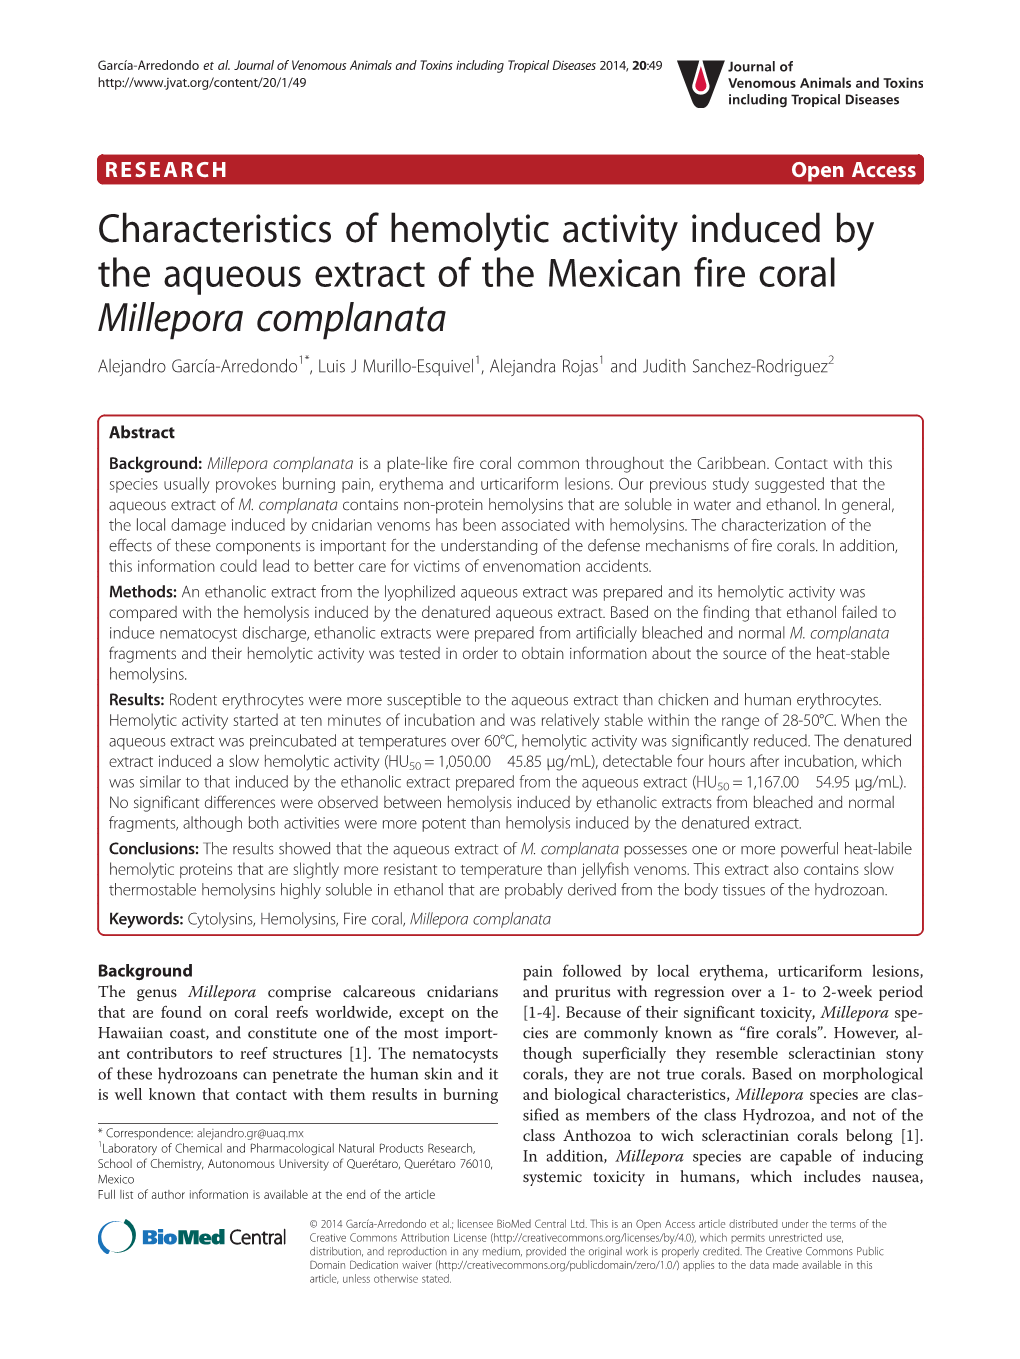 Characteristics of Hemolytic Activity Induced by the Aqueous Extract Of